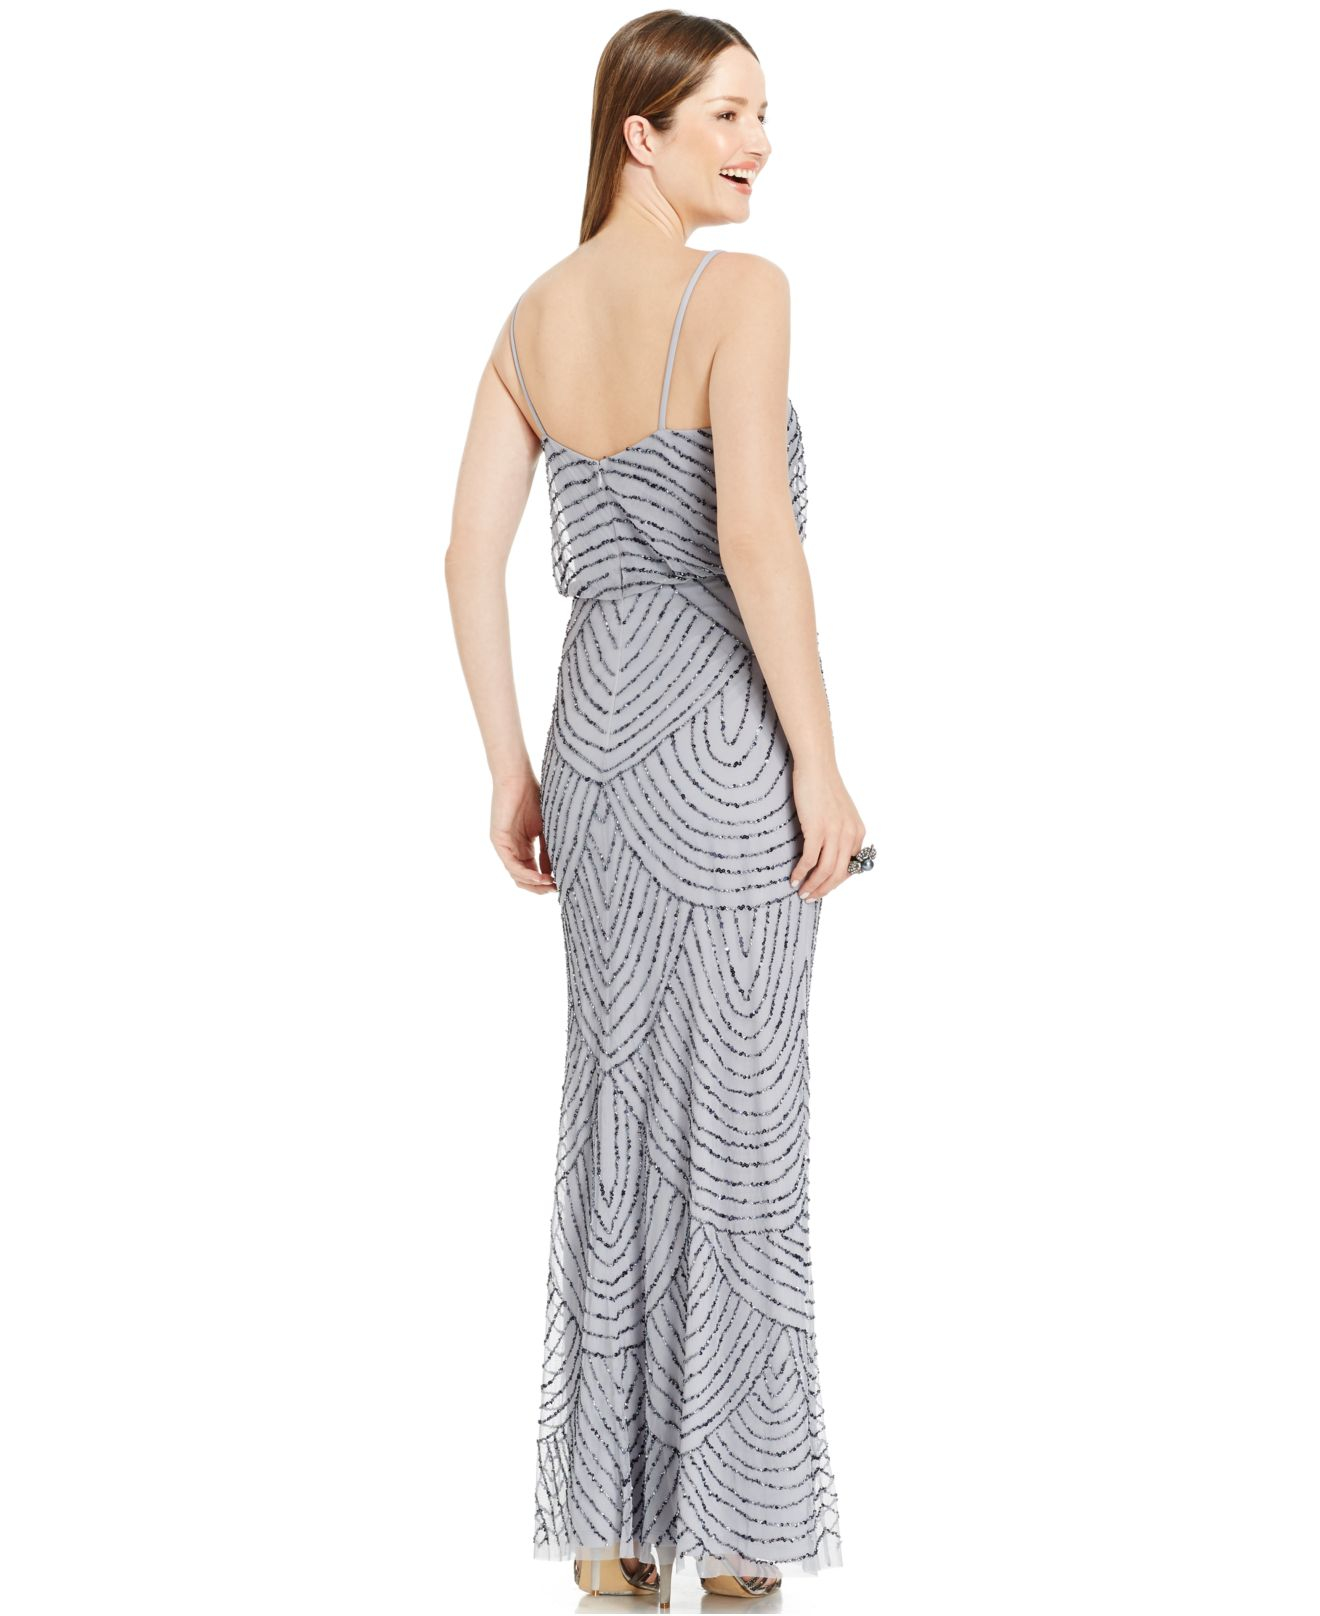 Adrianna Papell Petite Beaded Blouson Gown in Silver (Metallic) - Lyst